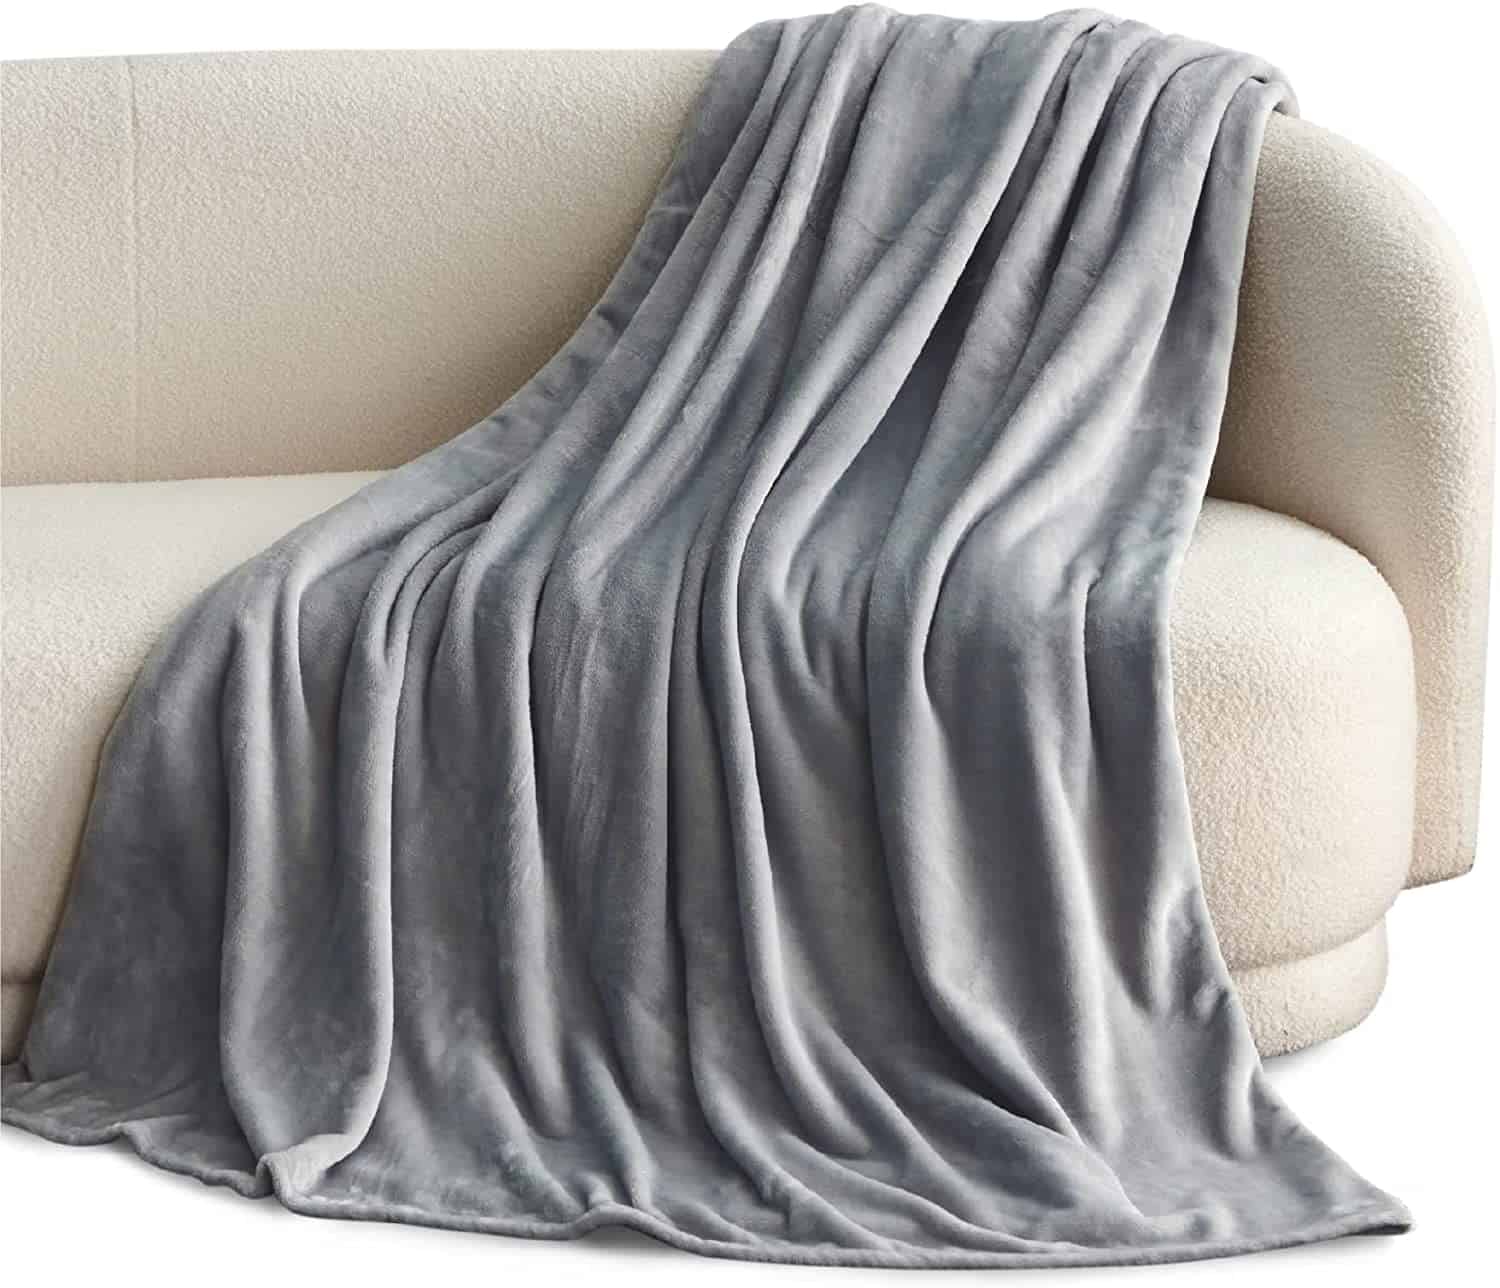 Cozy Blanket, Gift Ideas for your Boss 